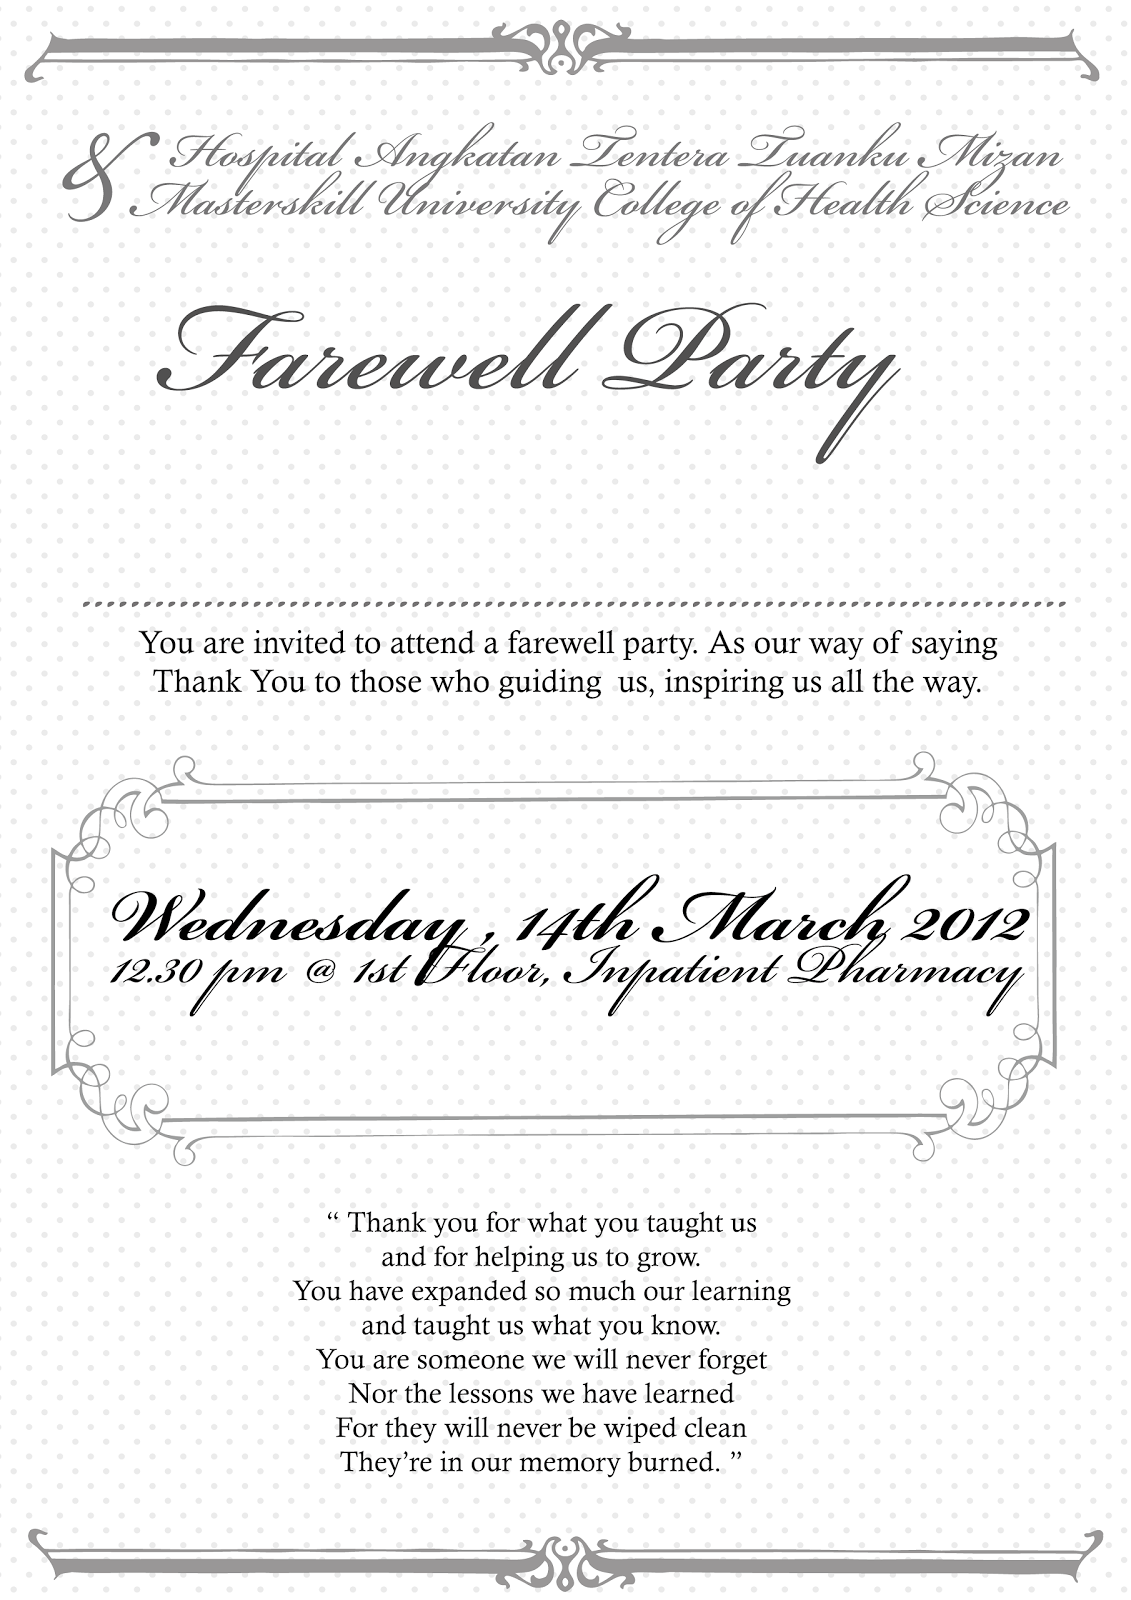 Sample Invitation Letter To Farewell Party